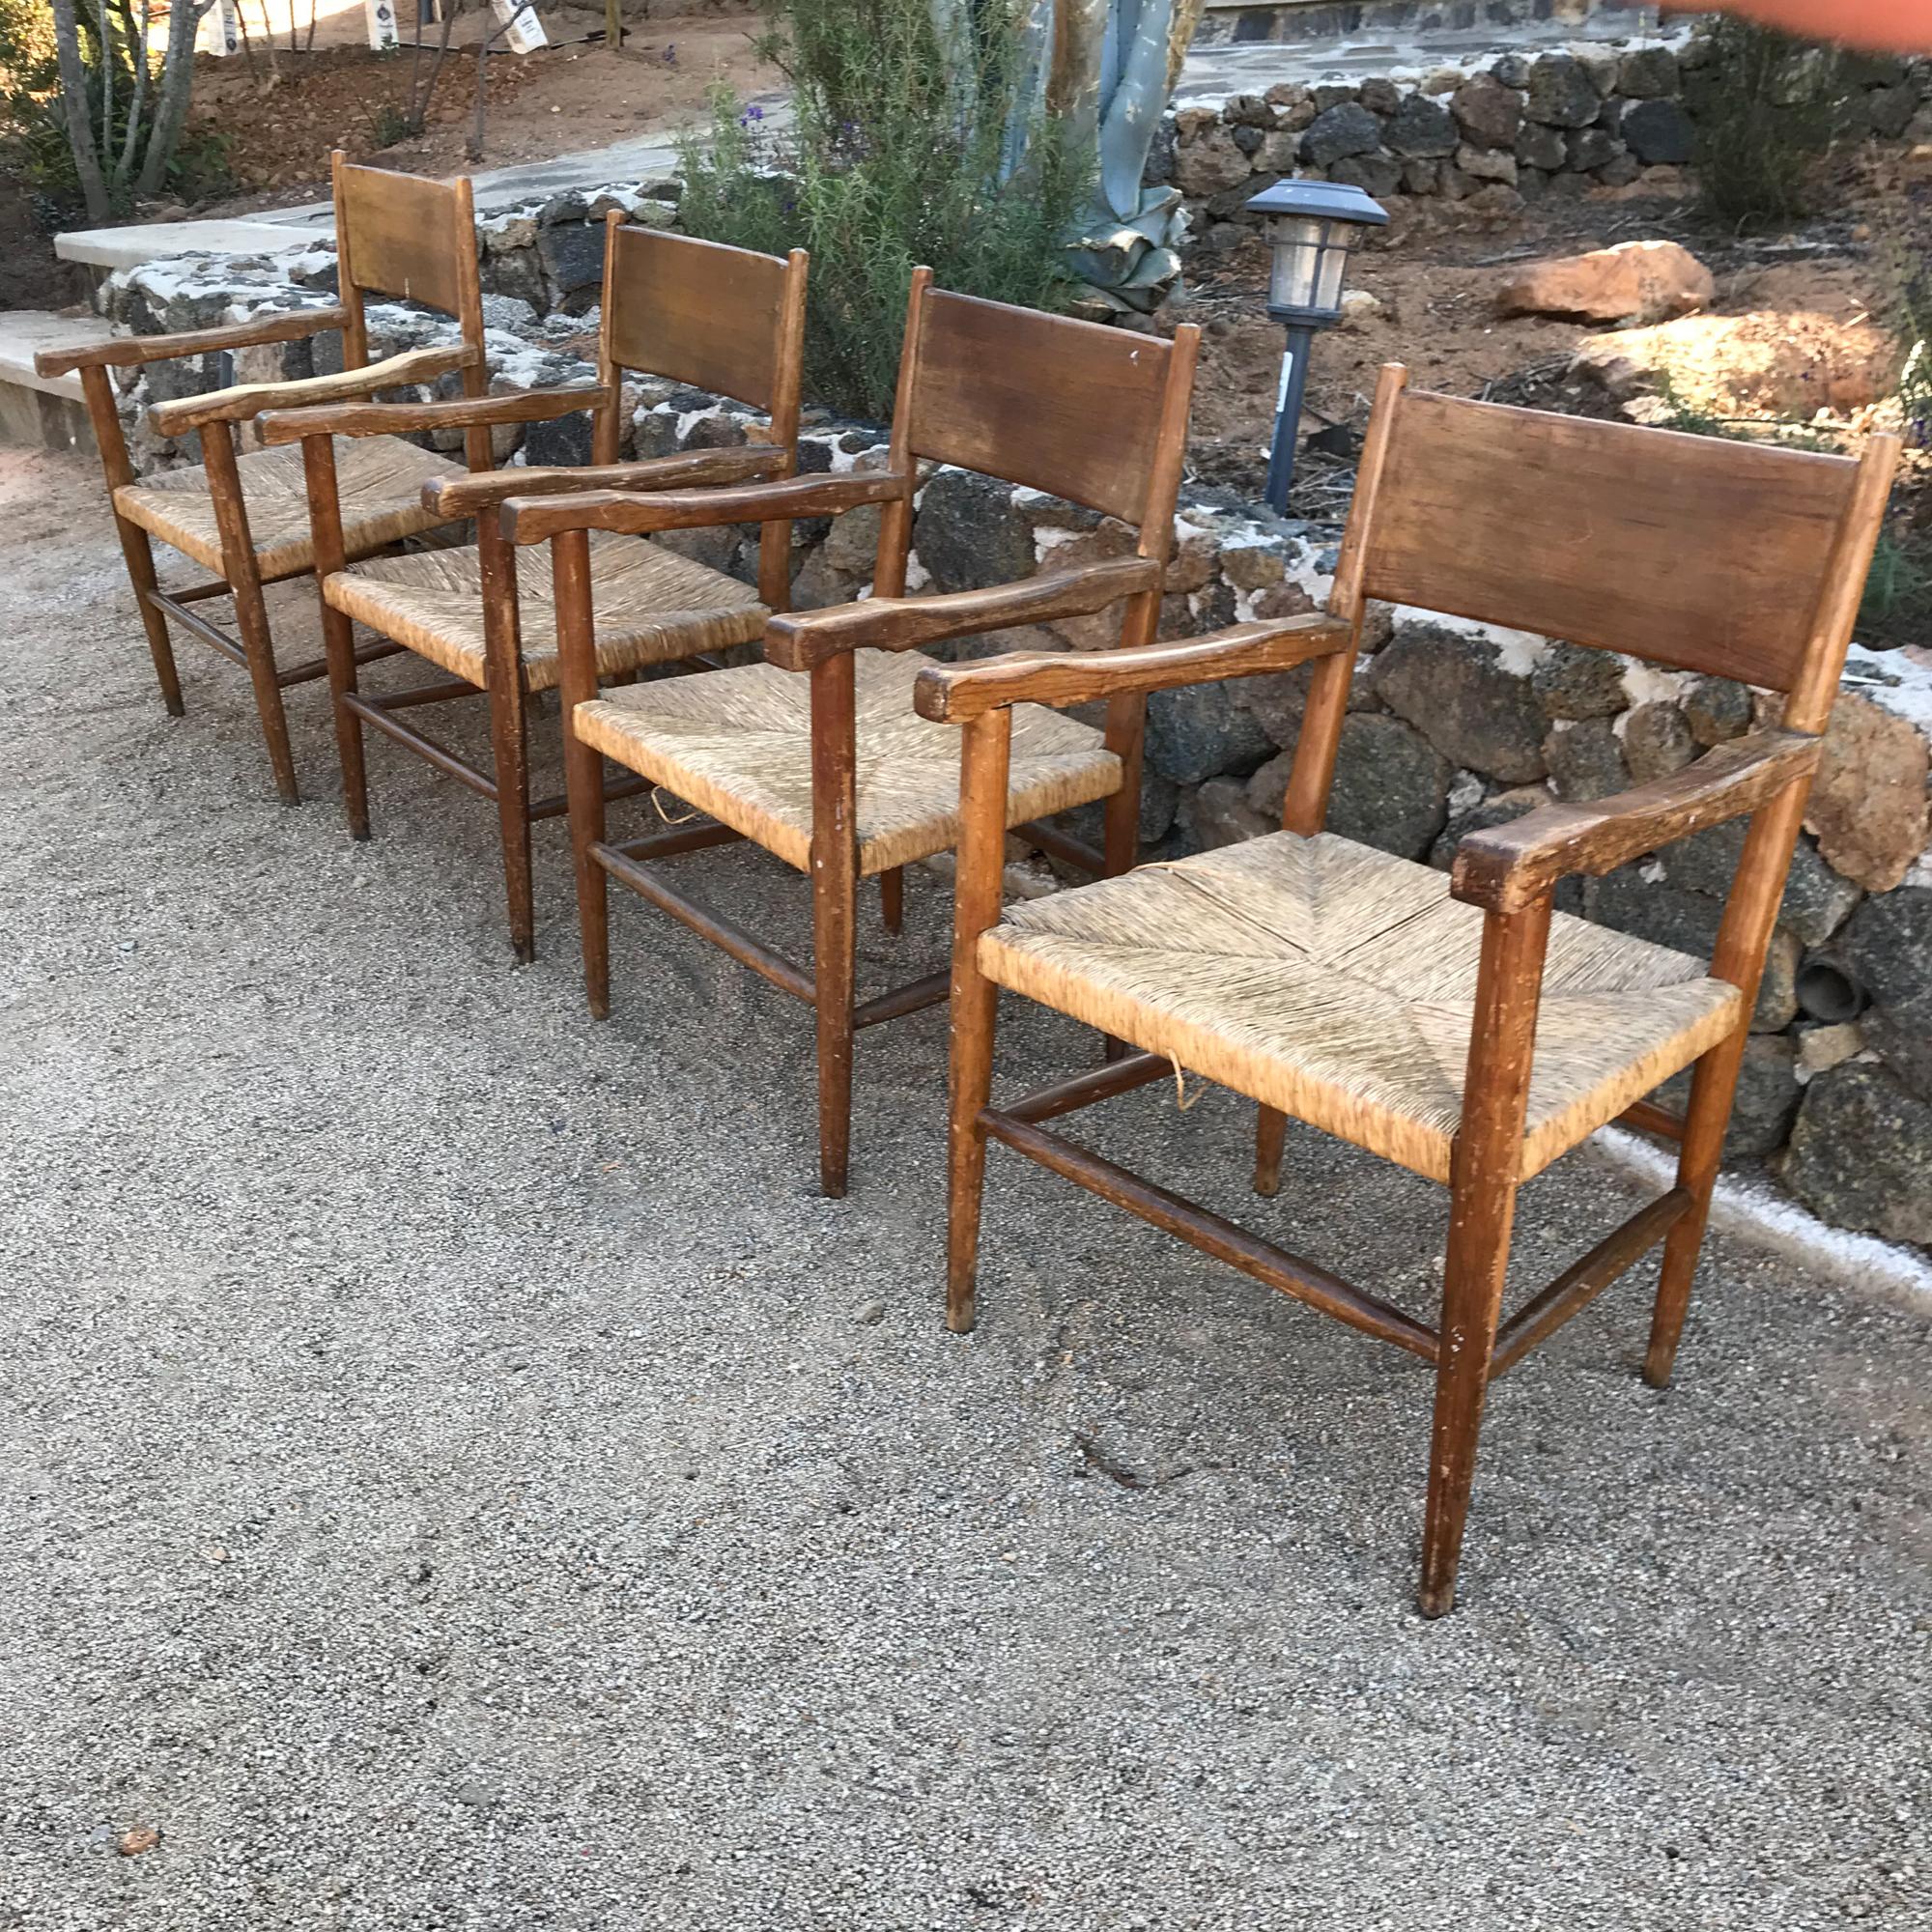 Spanish Hacienda Vintage Mexico Set of Four Chairs Seagrass & Rustic Wood 1950s 1